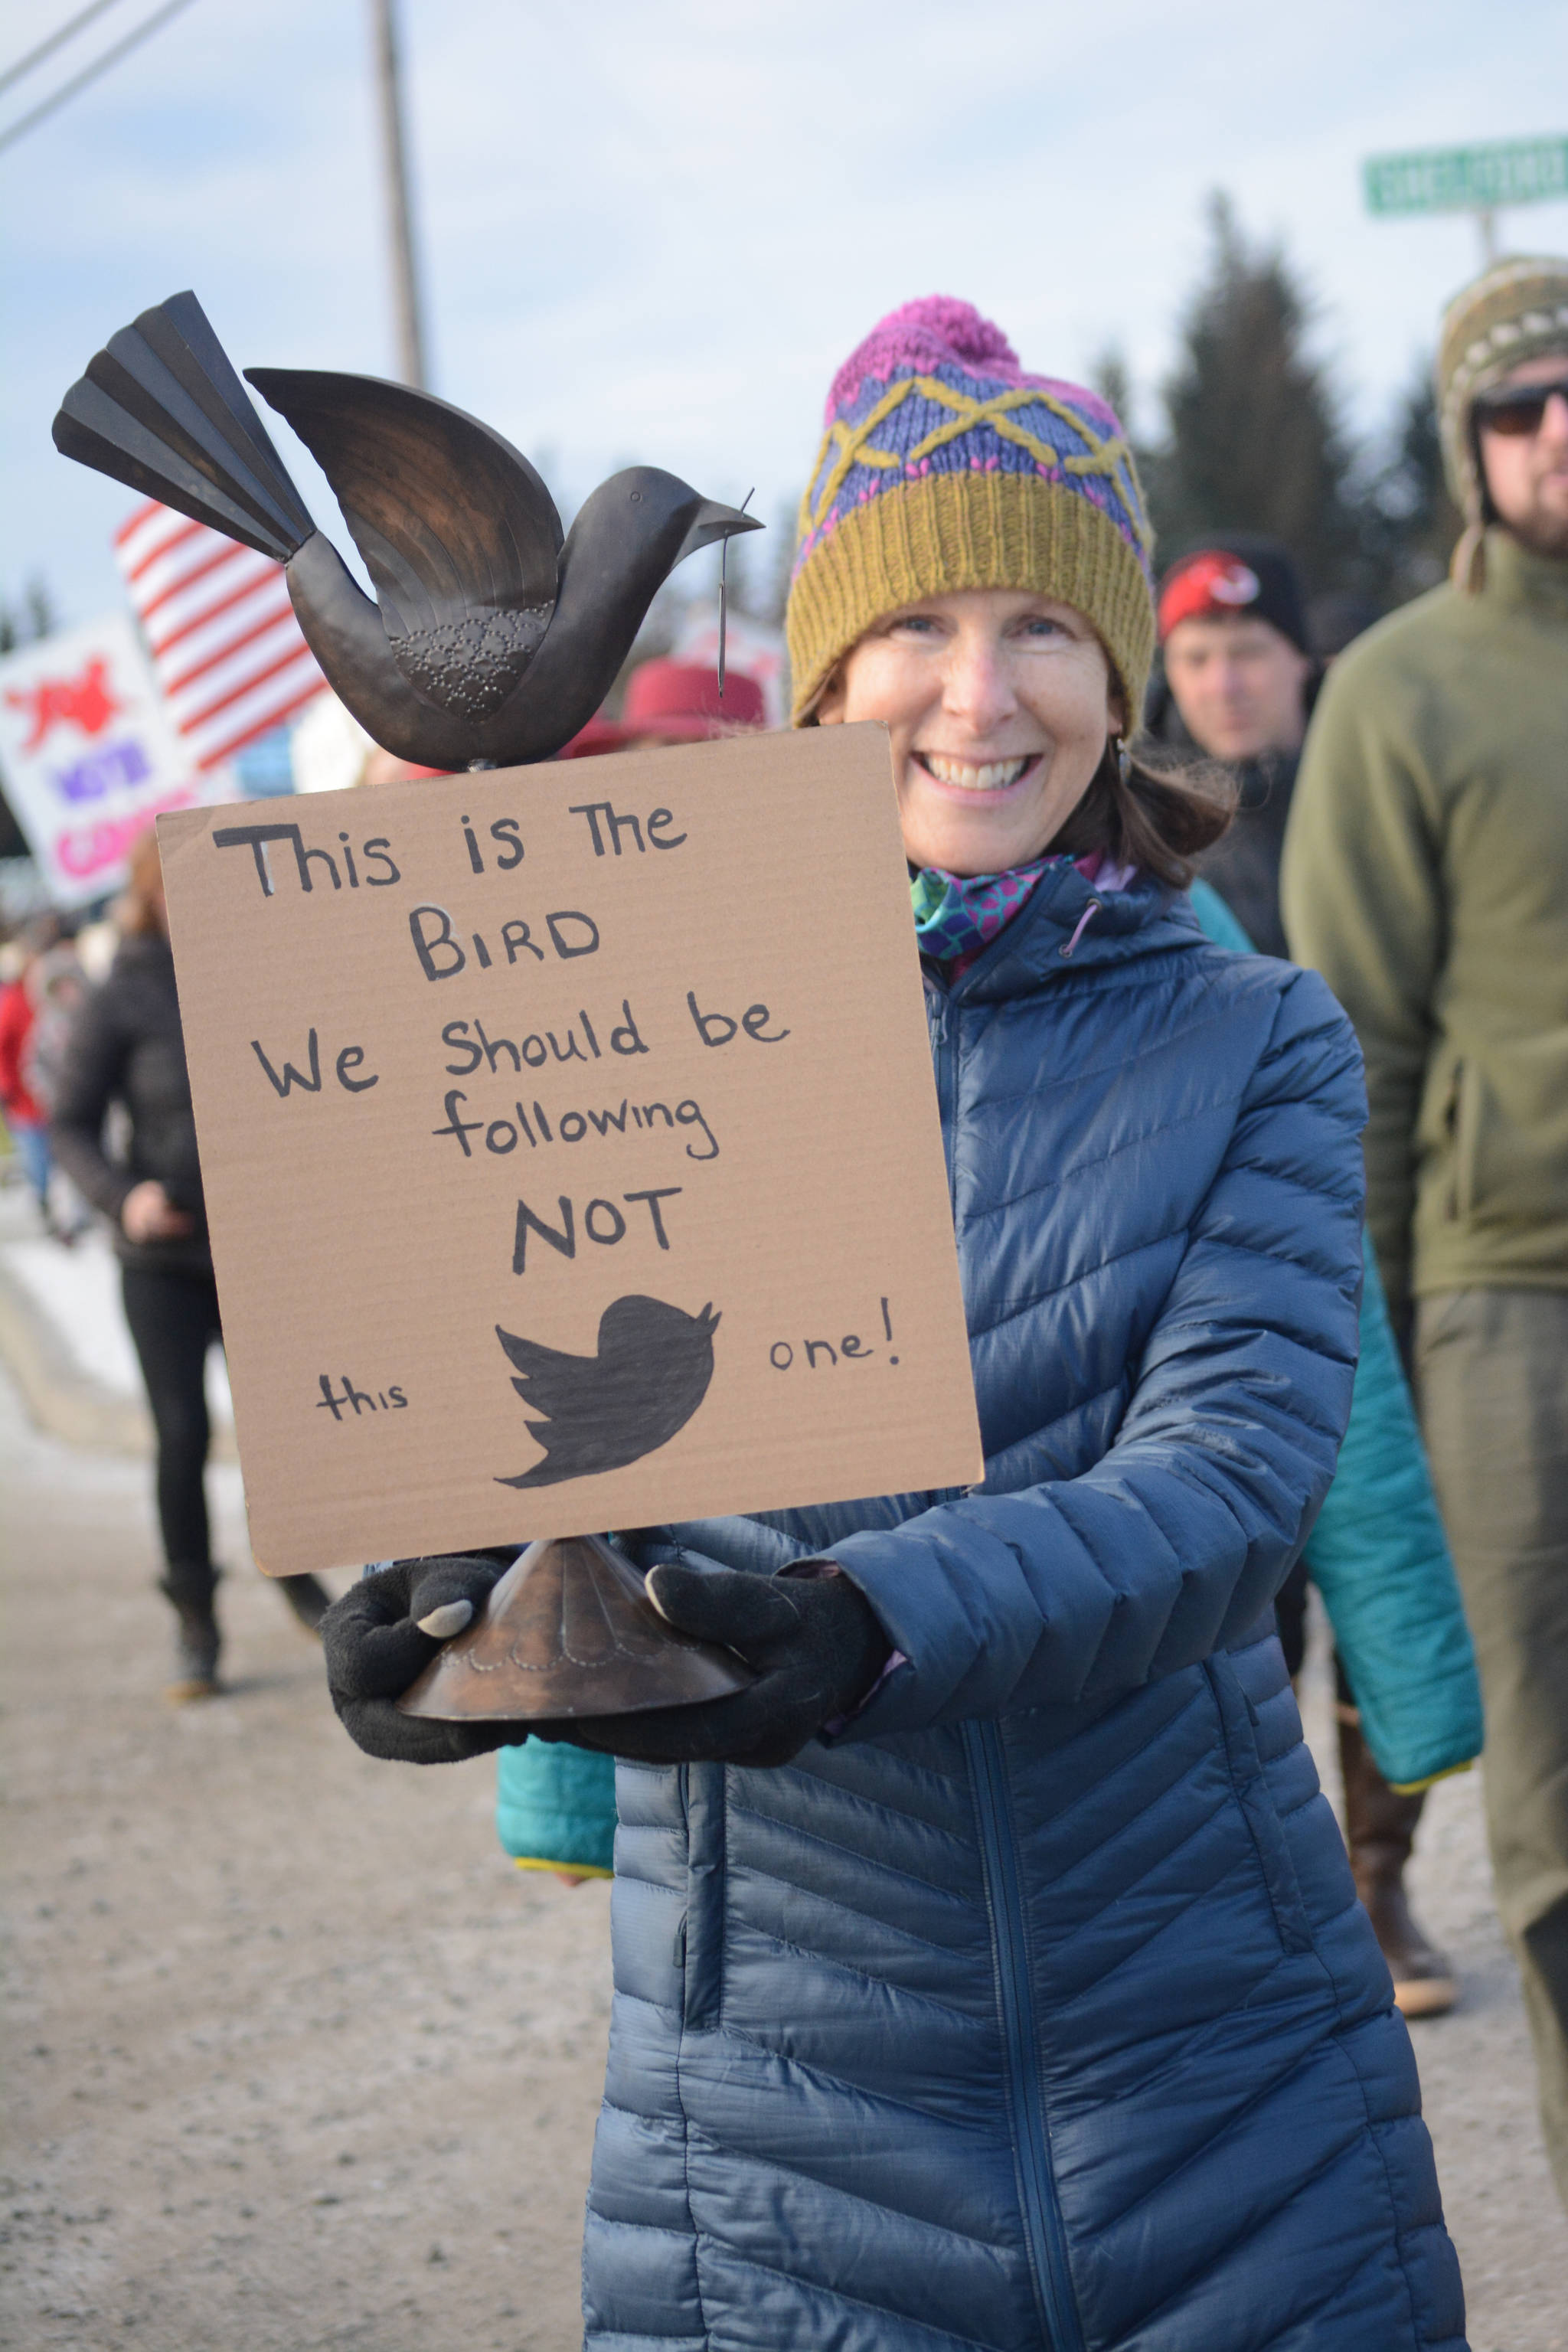 Sue Mauger holds a sign in the Homer March for Women on Saturday. About 700 people walked in the march along Pioneer Avenue on Jan. 20, 2018, in Homer, Alaska. The group of marchers extended from Main Street to Kachemak Way. (Photo by Michael Armstrong/Homer News)